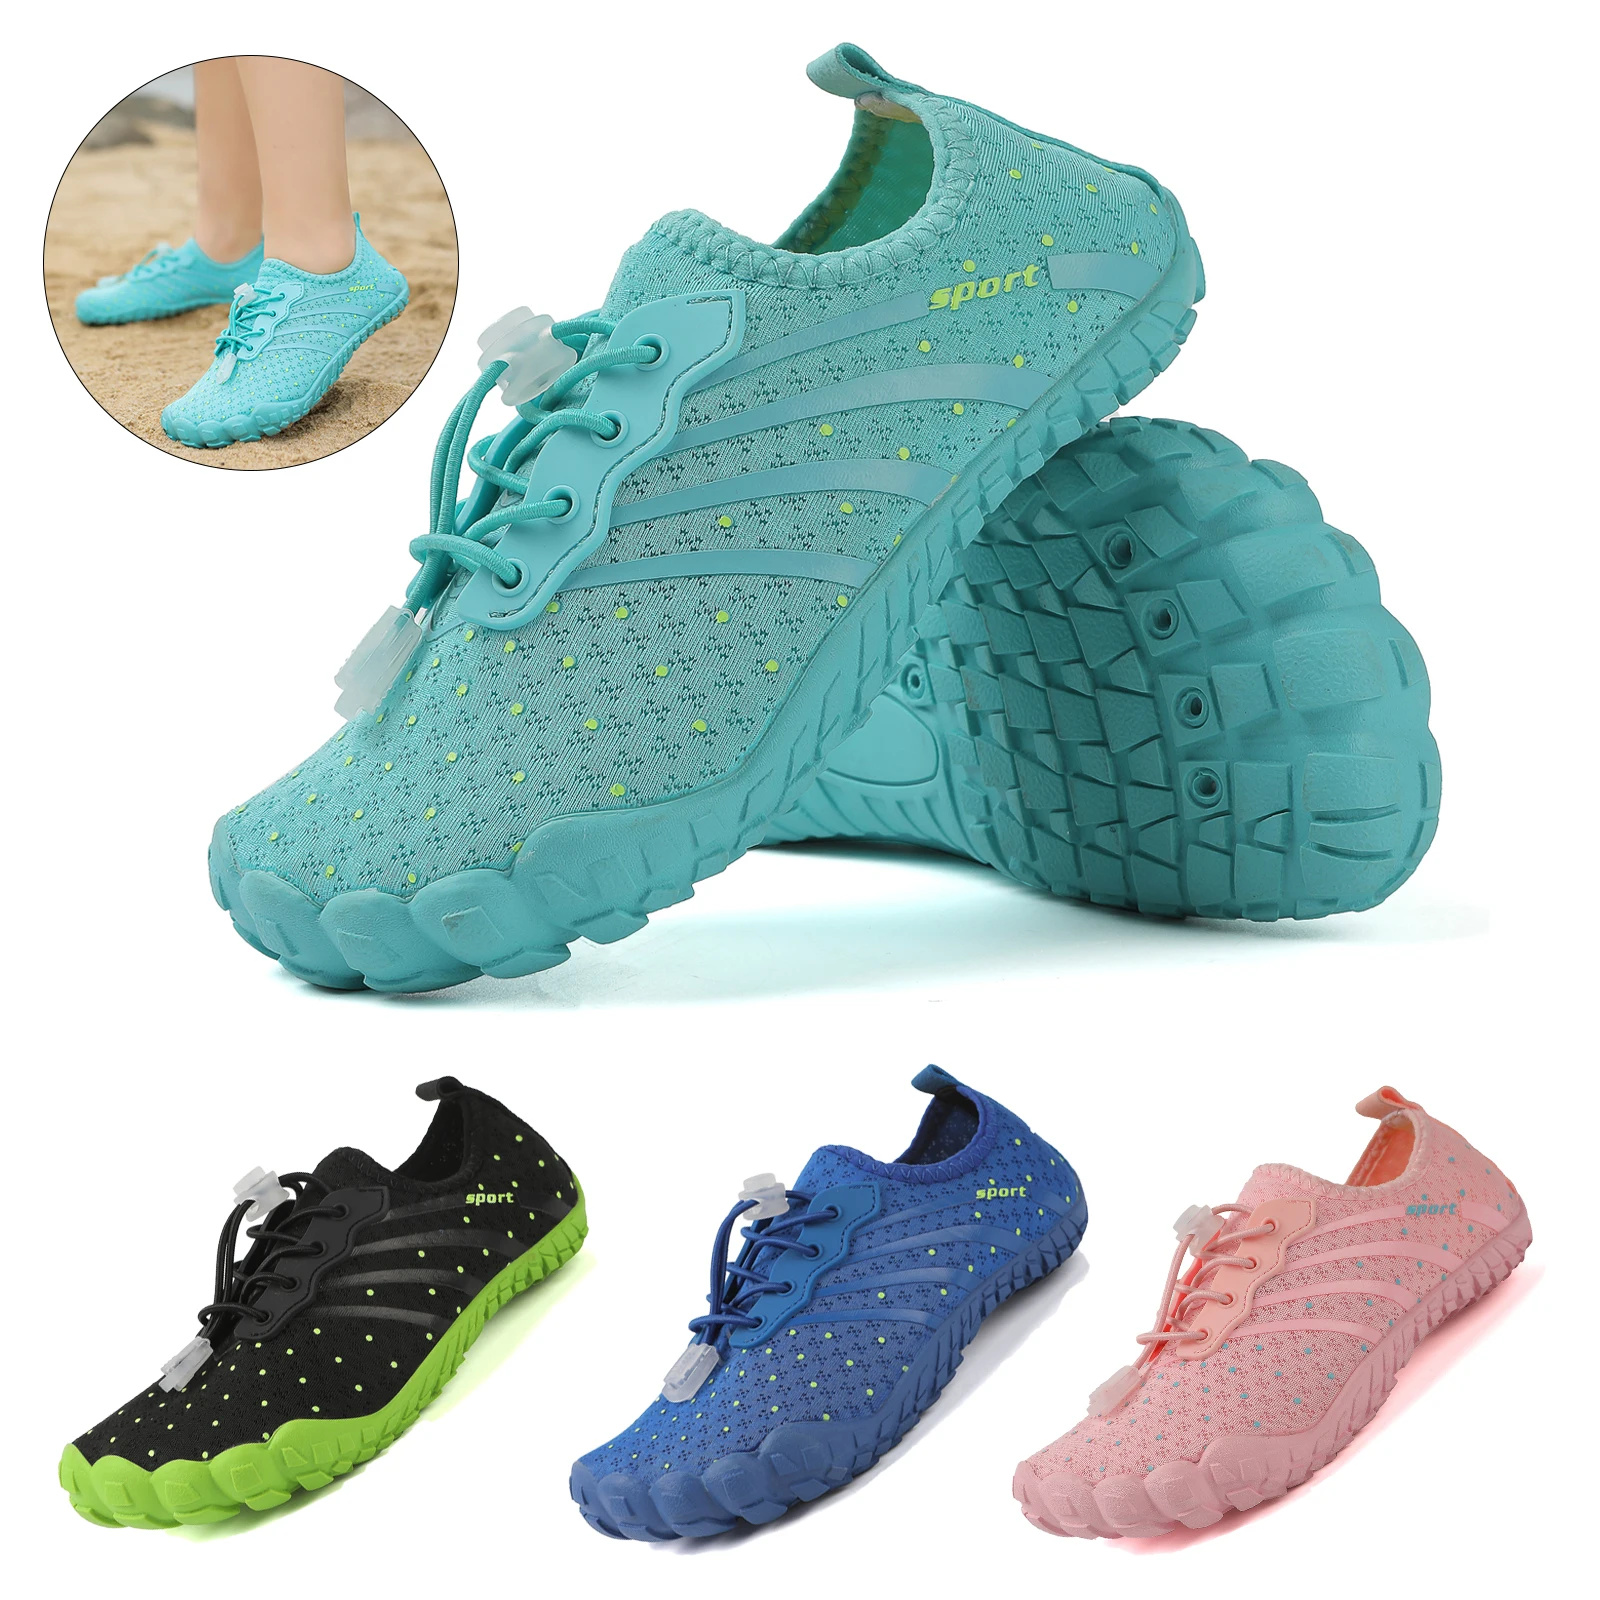 

New Children Quick-Dry Water Sports Shoes Boy Girl Breathable Aqua Shoes Swim Beach Sneakers Diving Barefoot Surfing Wading Shoe